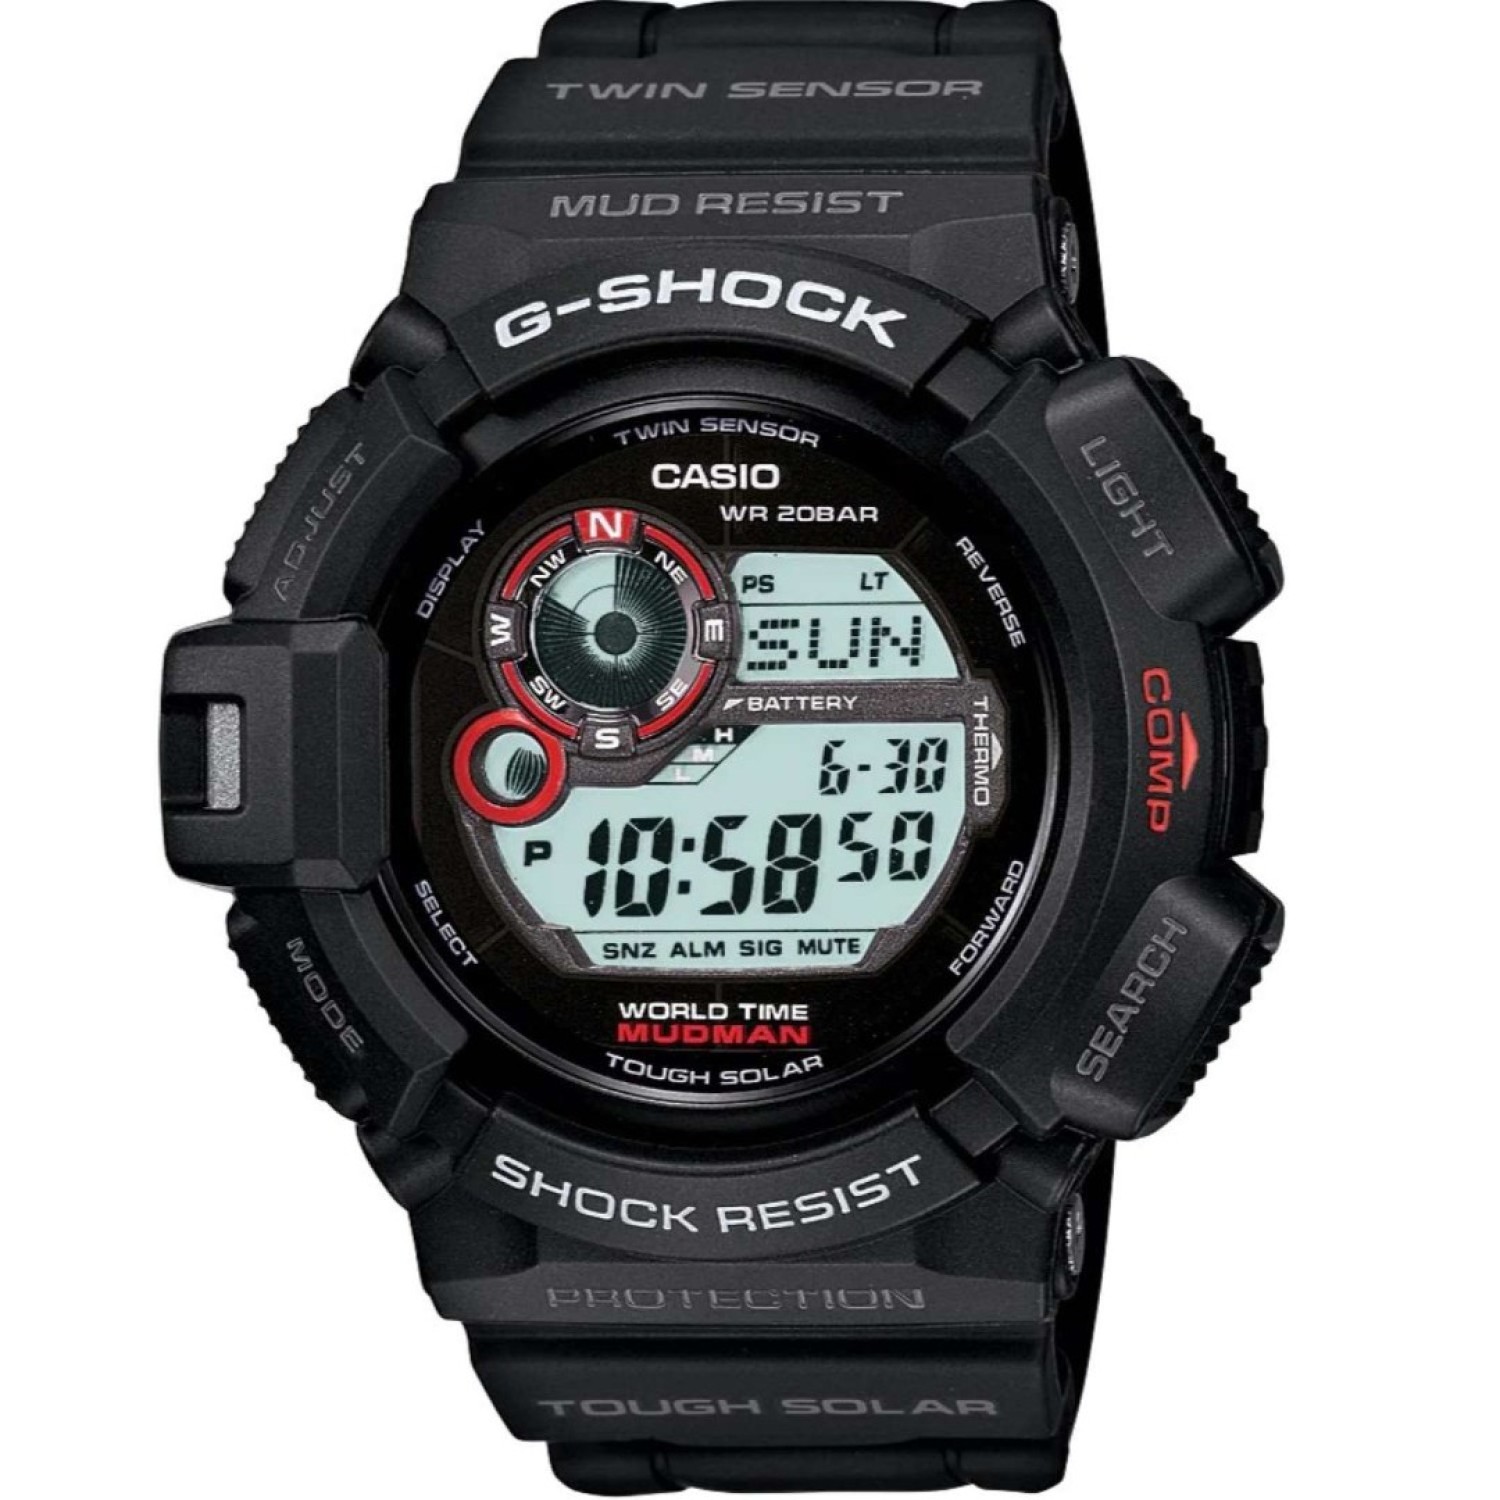 G9300-1D Mudman. Casio G-Shock G9300-1D Mudman Since the release of the original G-SHOCK watch in 1983, the brand has continued to evolve, with advanced functions, construction and design all based on outstanding shock resistance. @christies.online